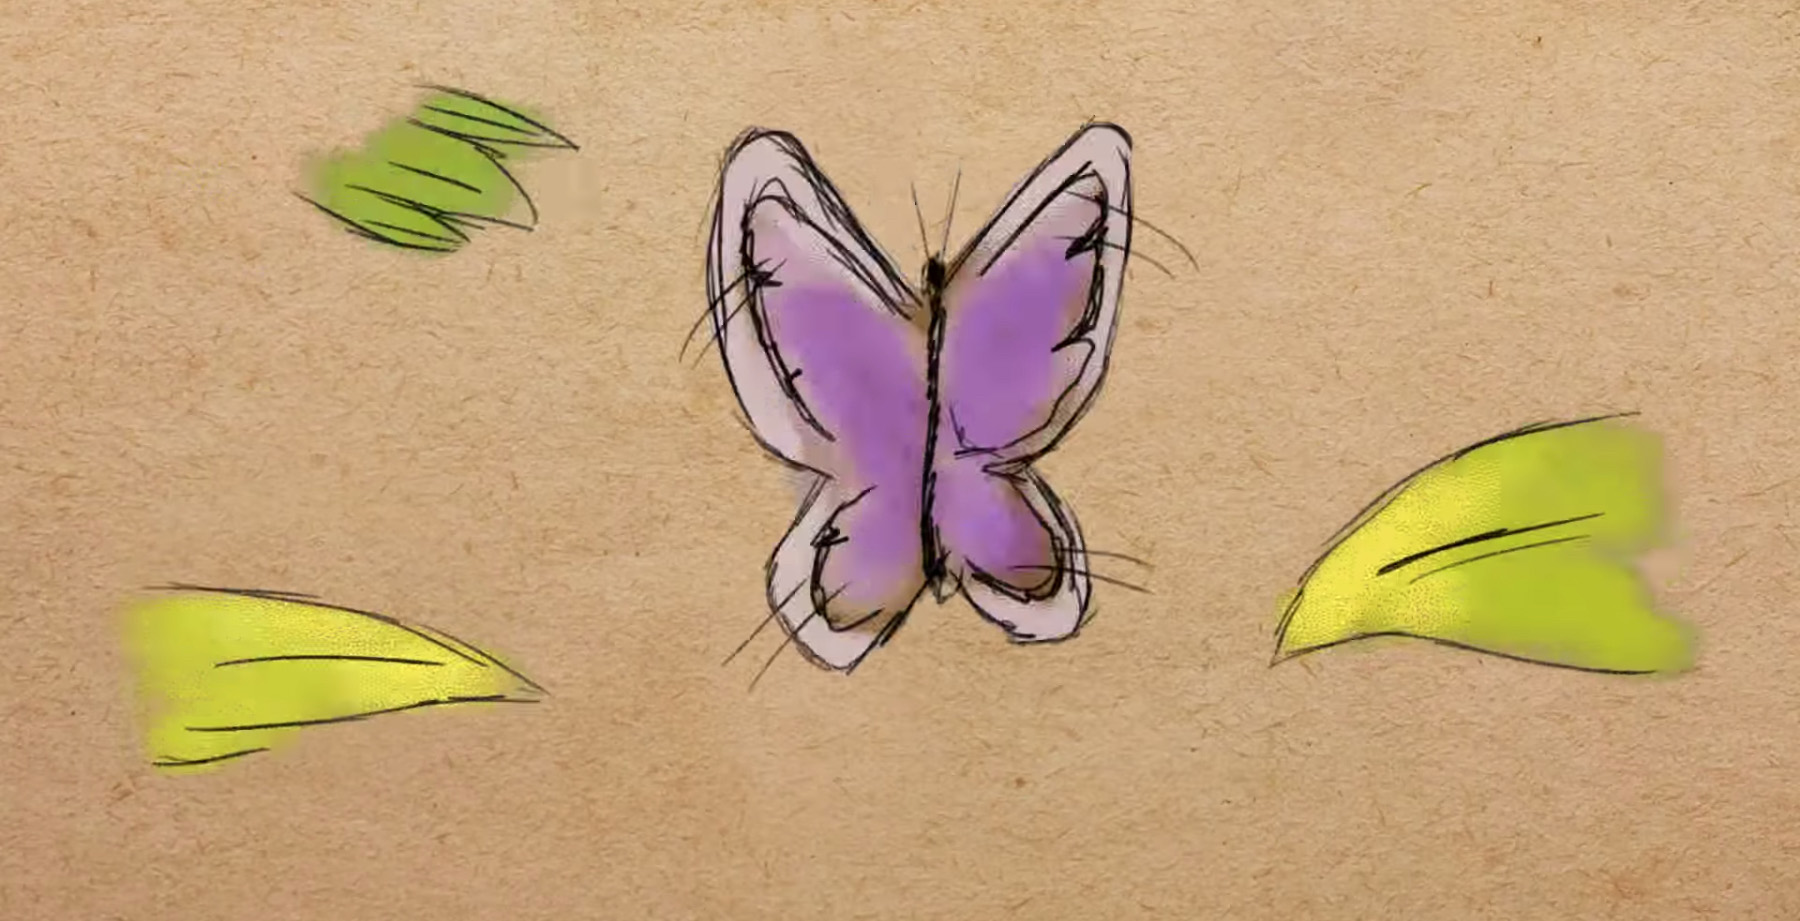 Illustration of a Xerces blue butterfly